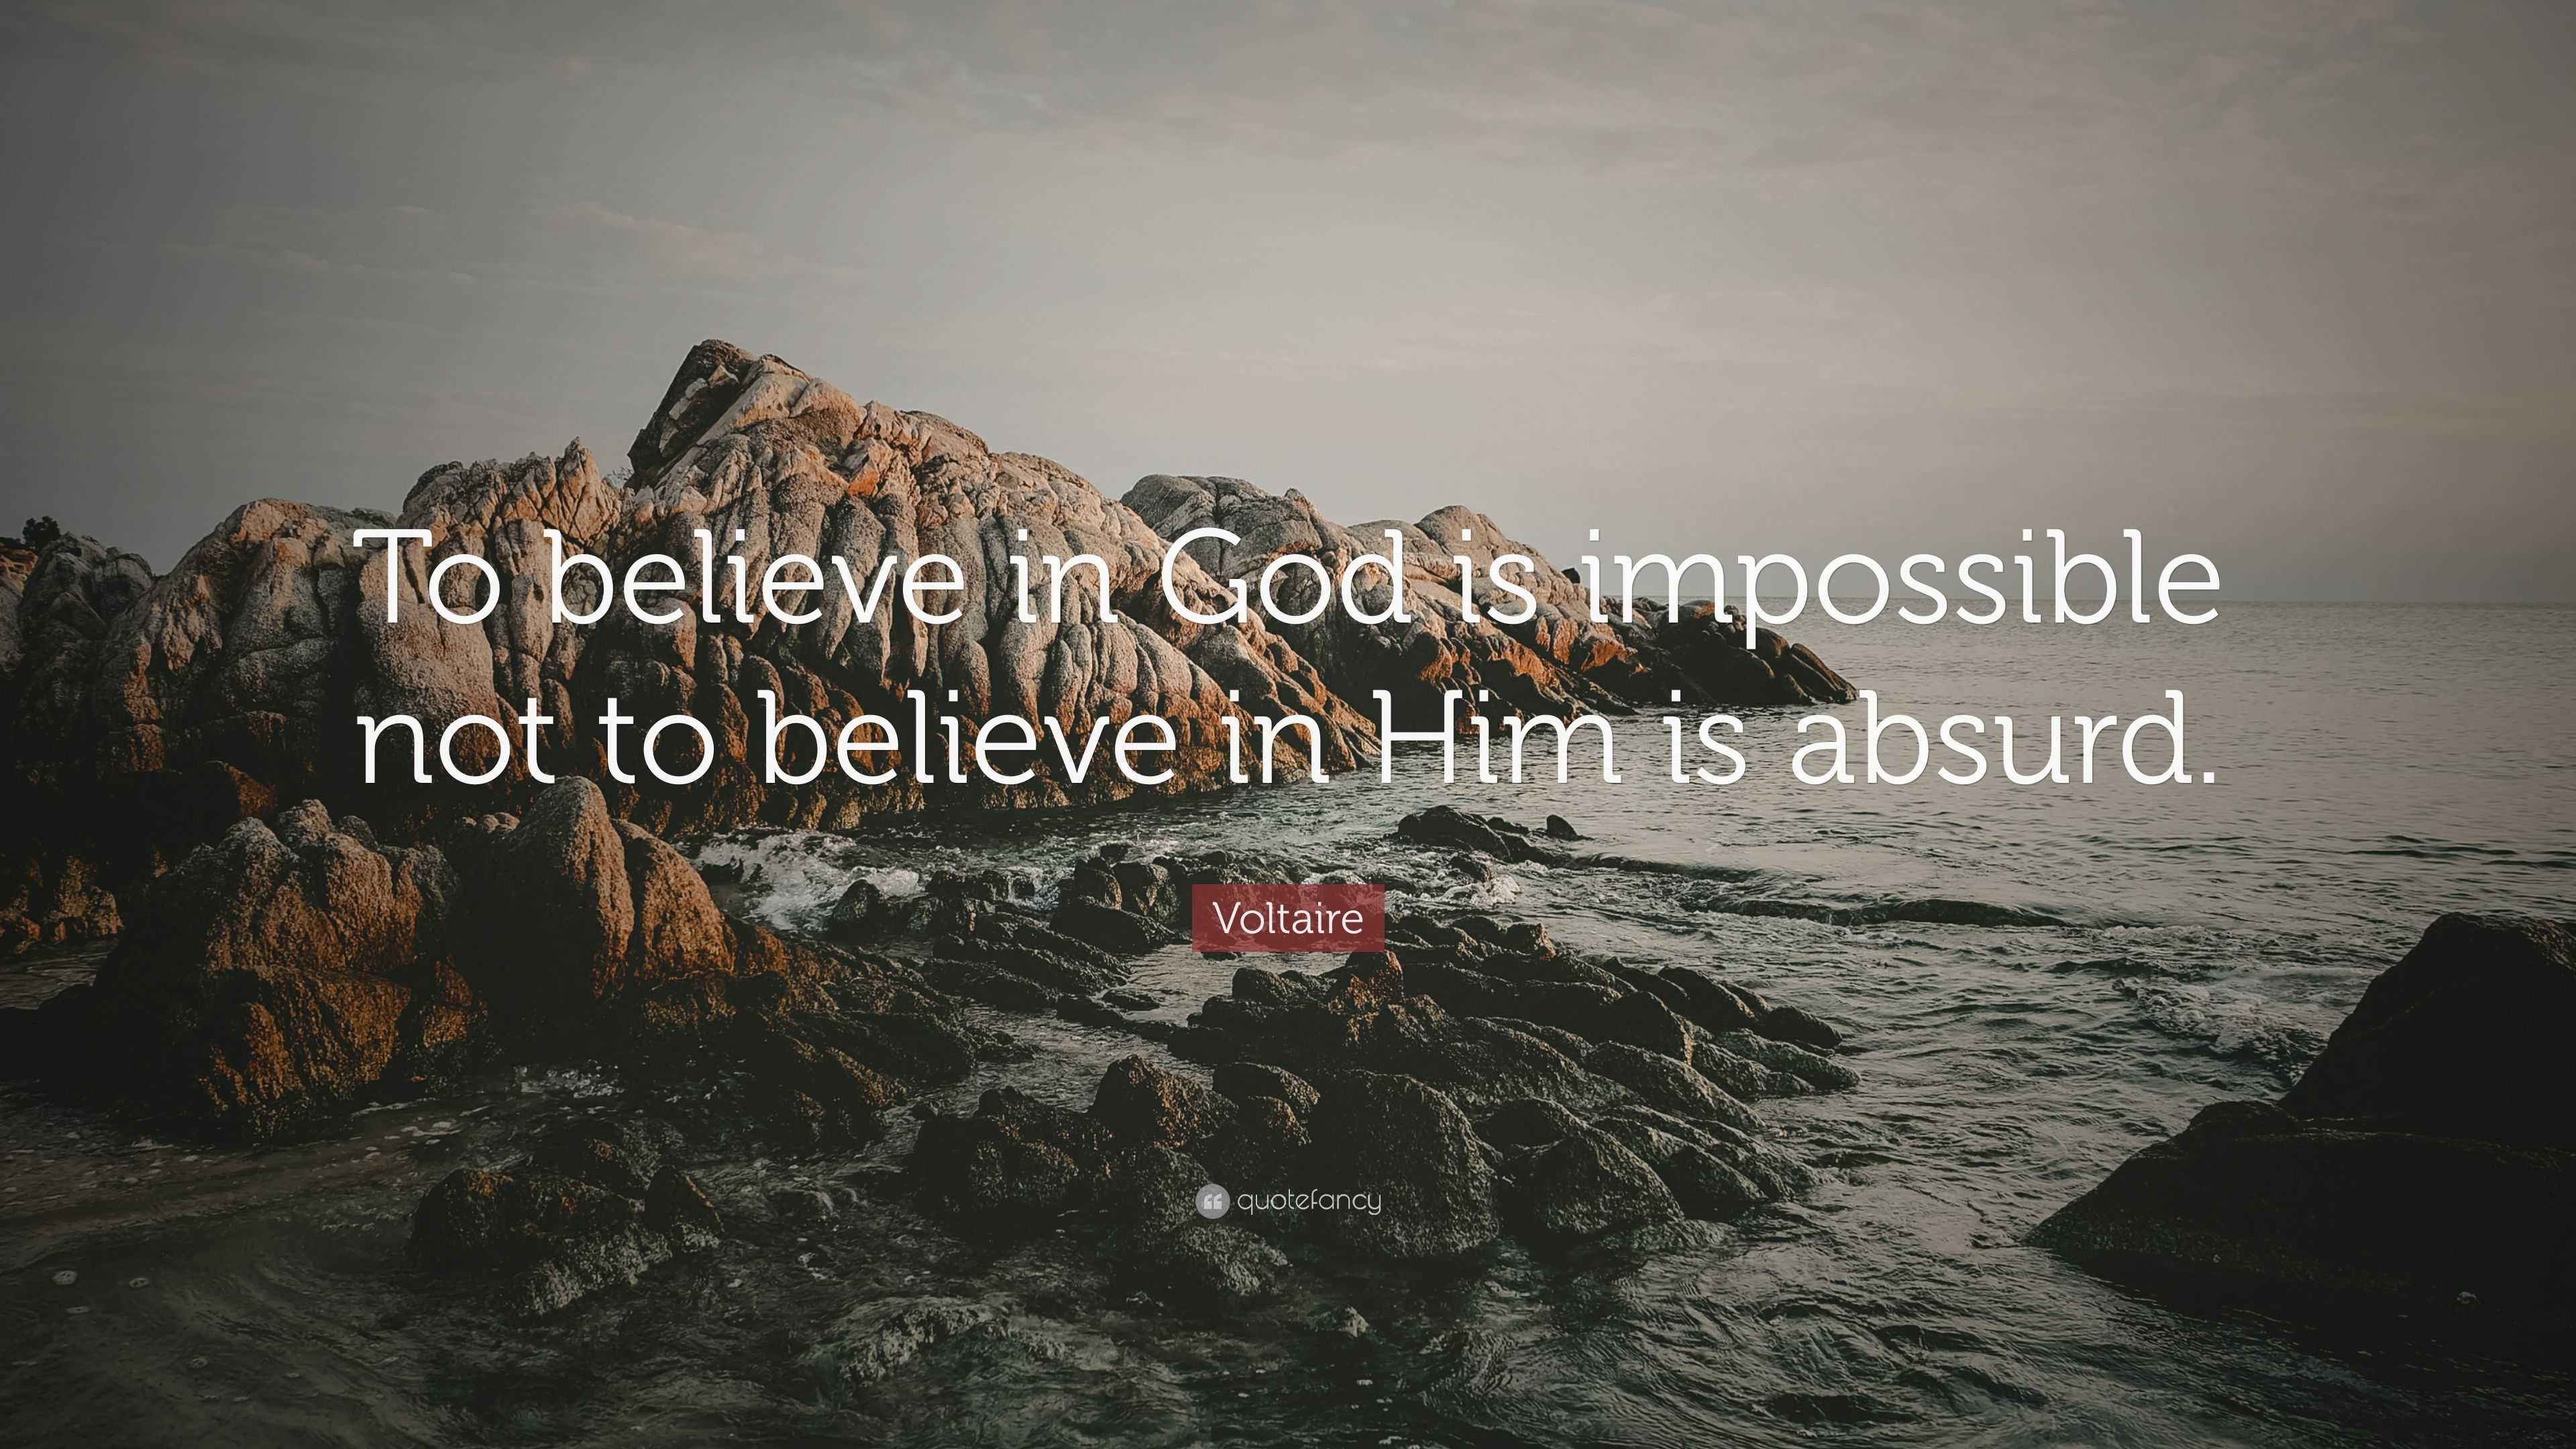 Voltaire Quote: “To believe in God is impossible not to believe in Him ...